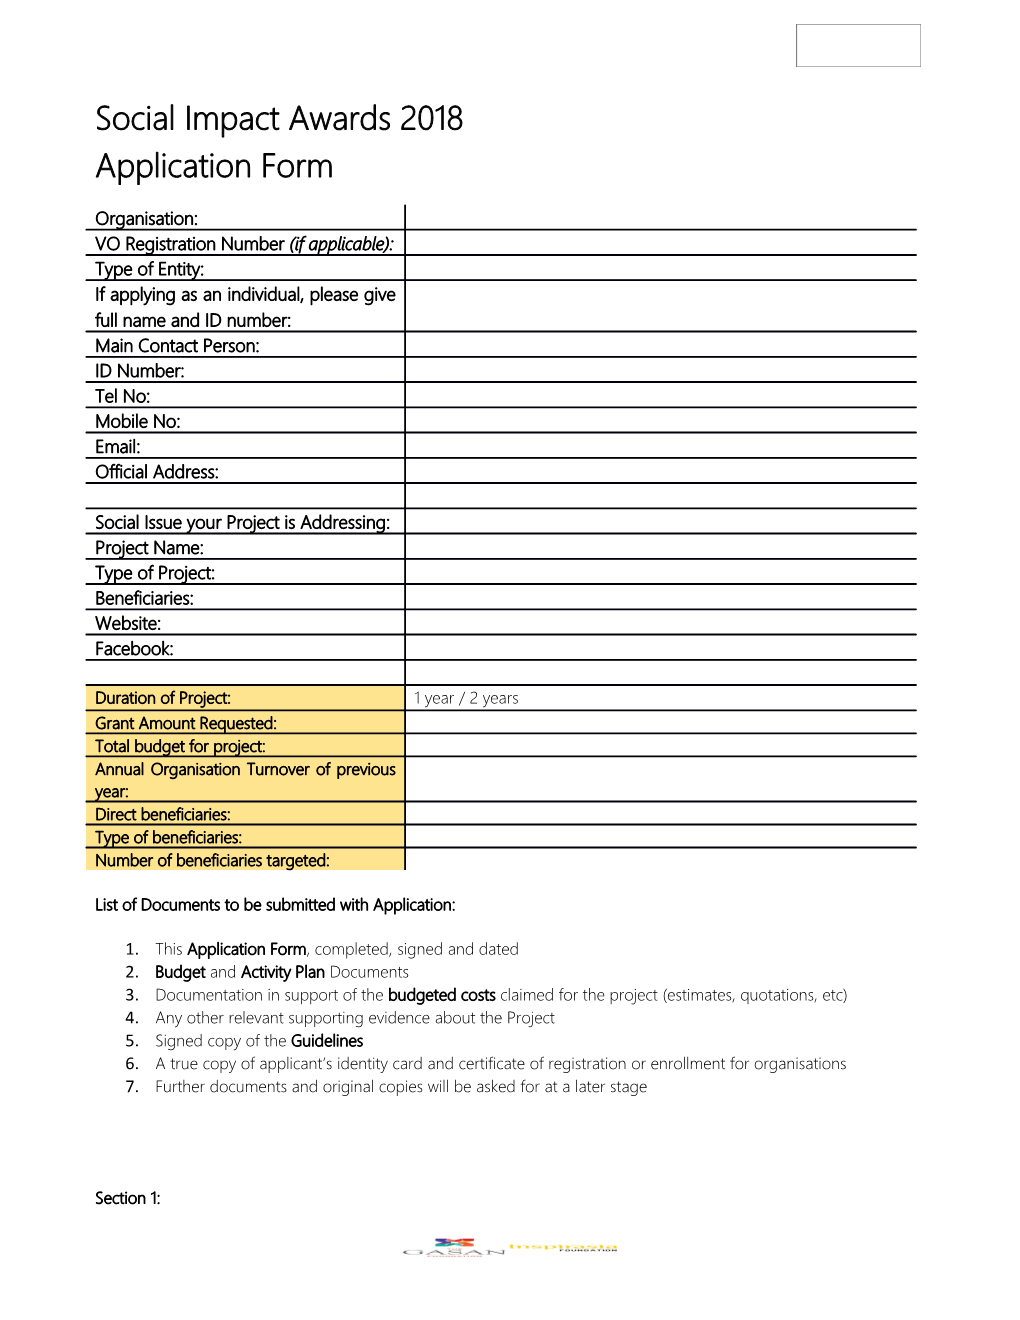 List of Documents to Be Submitted with Application